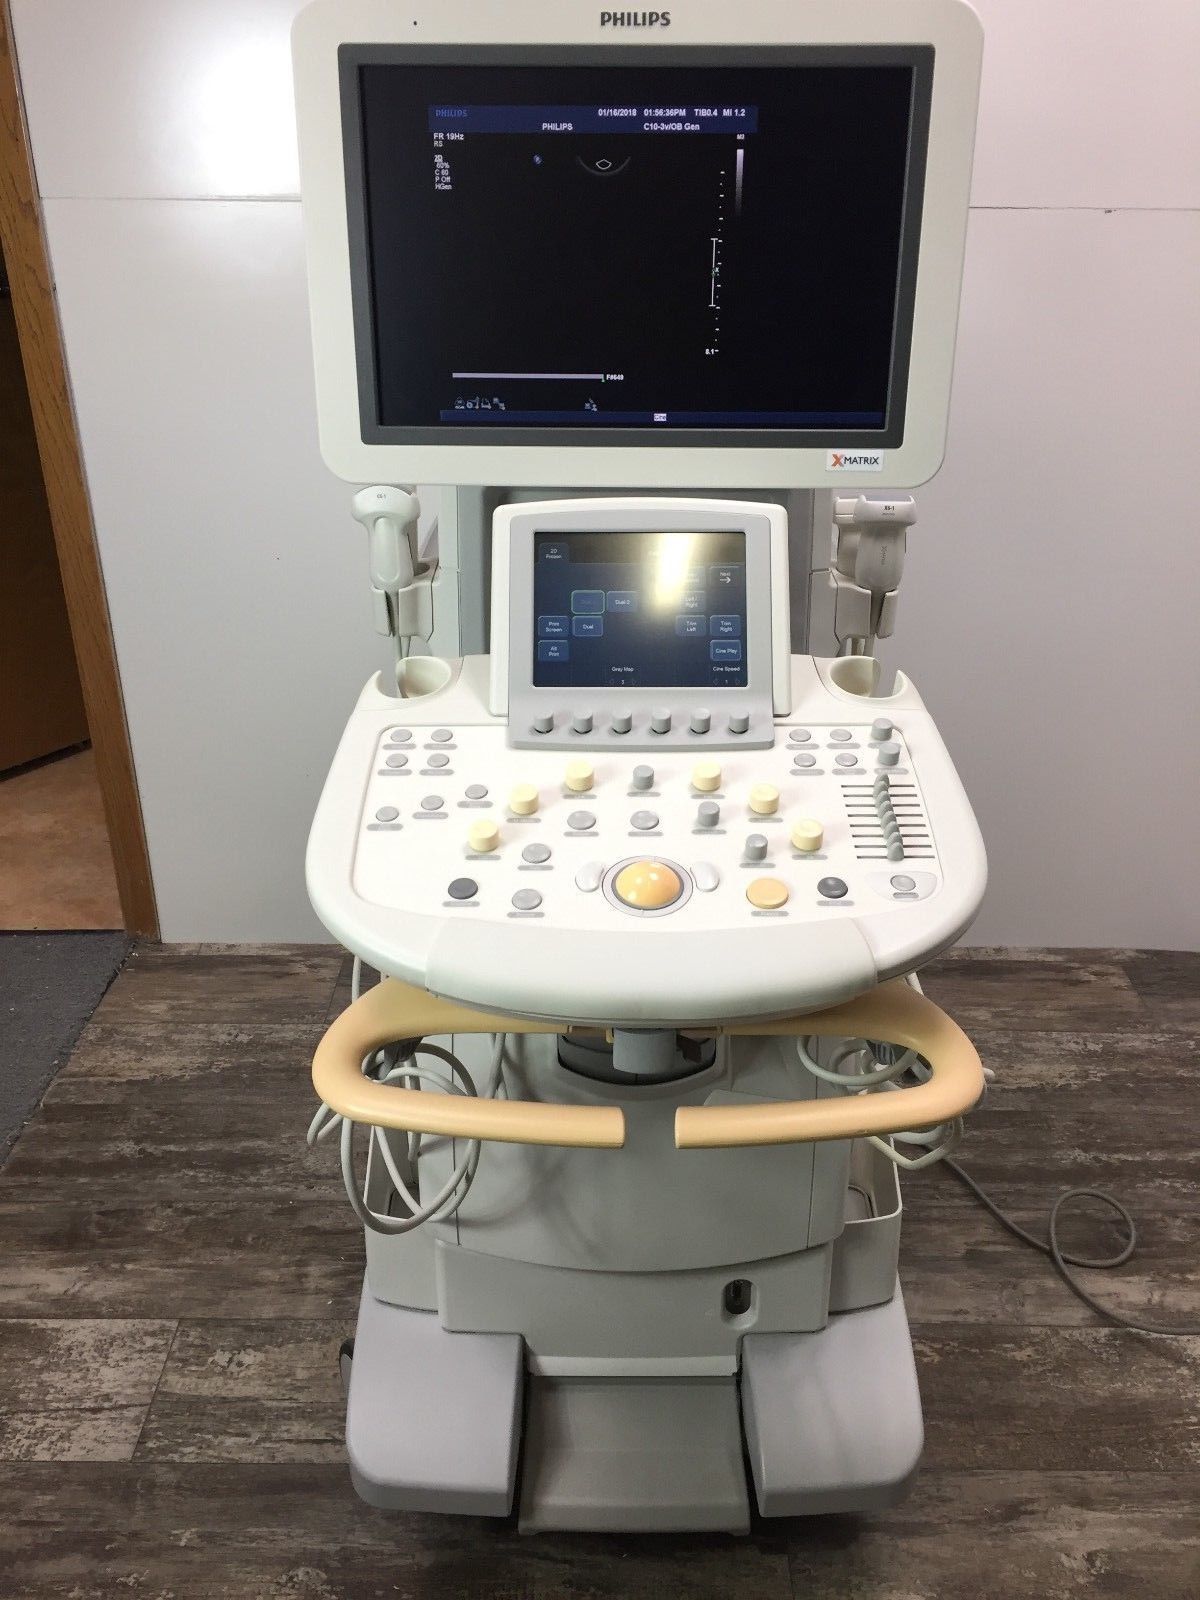 PHILIPS IU22 CART G ULTRASOUND SYSTEM 2014 WITH X6-1, C10-3V, L12-5 & C5-1